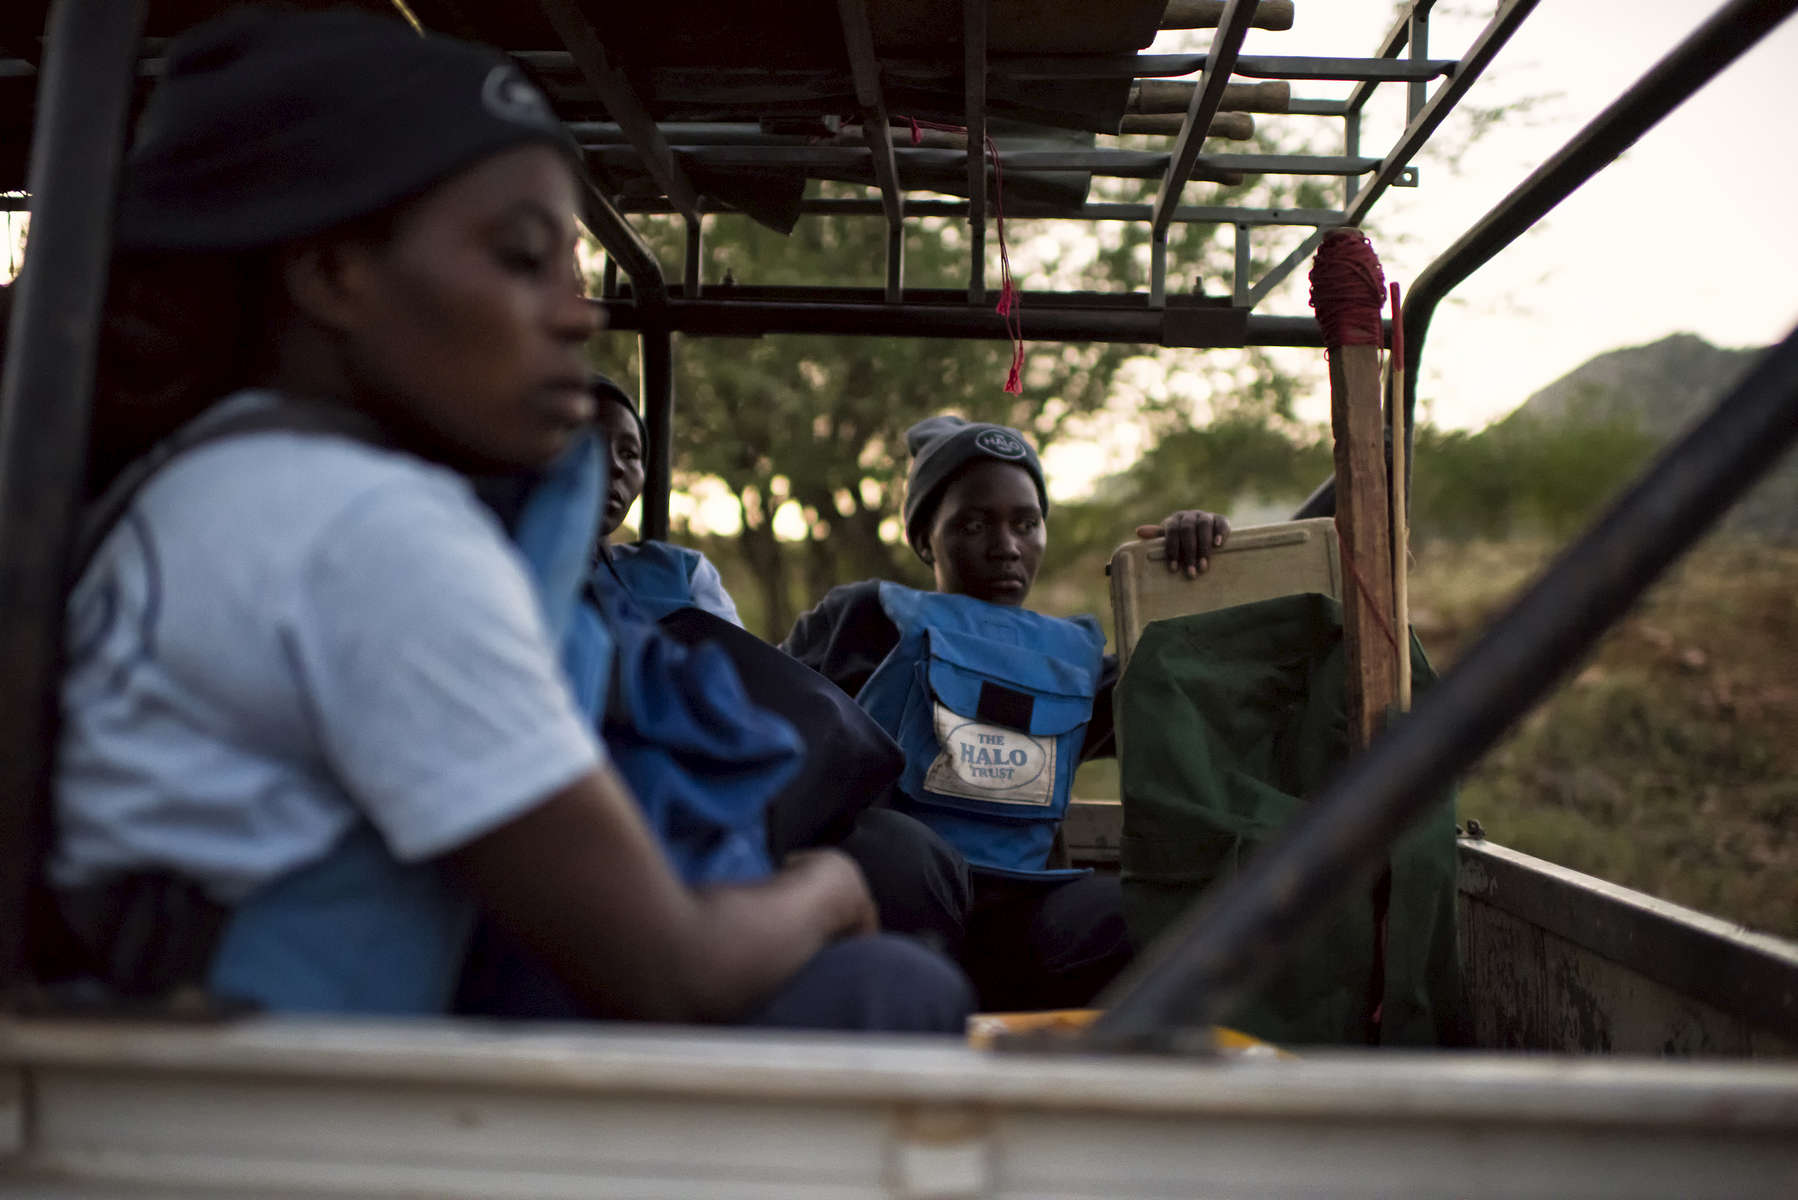 May 3, 2018: KANENGUERERE, ANGOLA - HALO deminer Valentina Sikato sits in the back of the truck as HALO staff drop off equipment at the minefields on their first day back at work in Kanenguerere.  